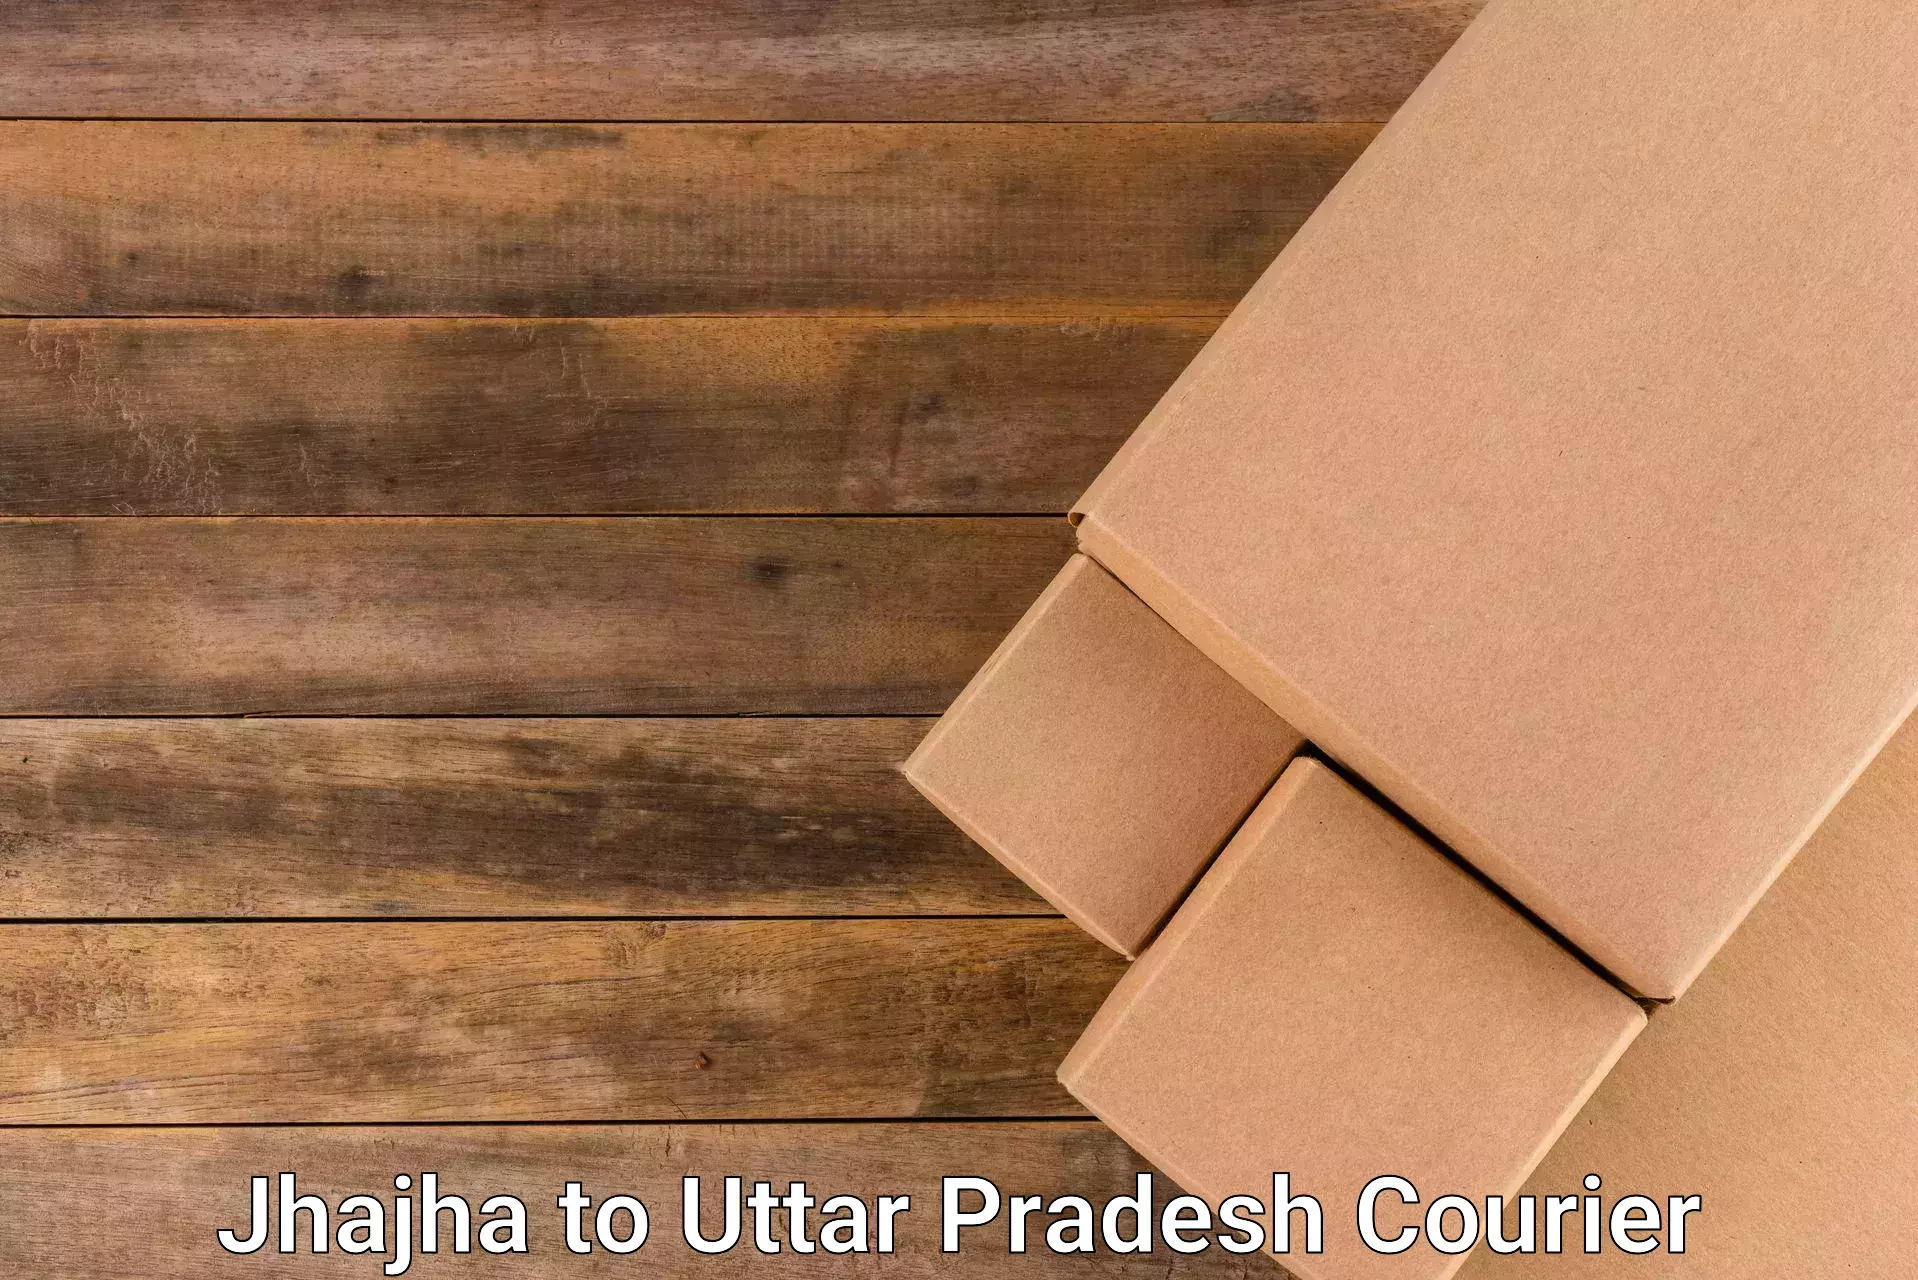 Reliable parcel services Jhajha to Ayodhya